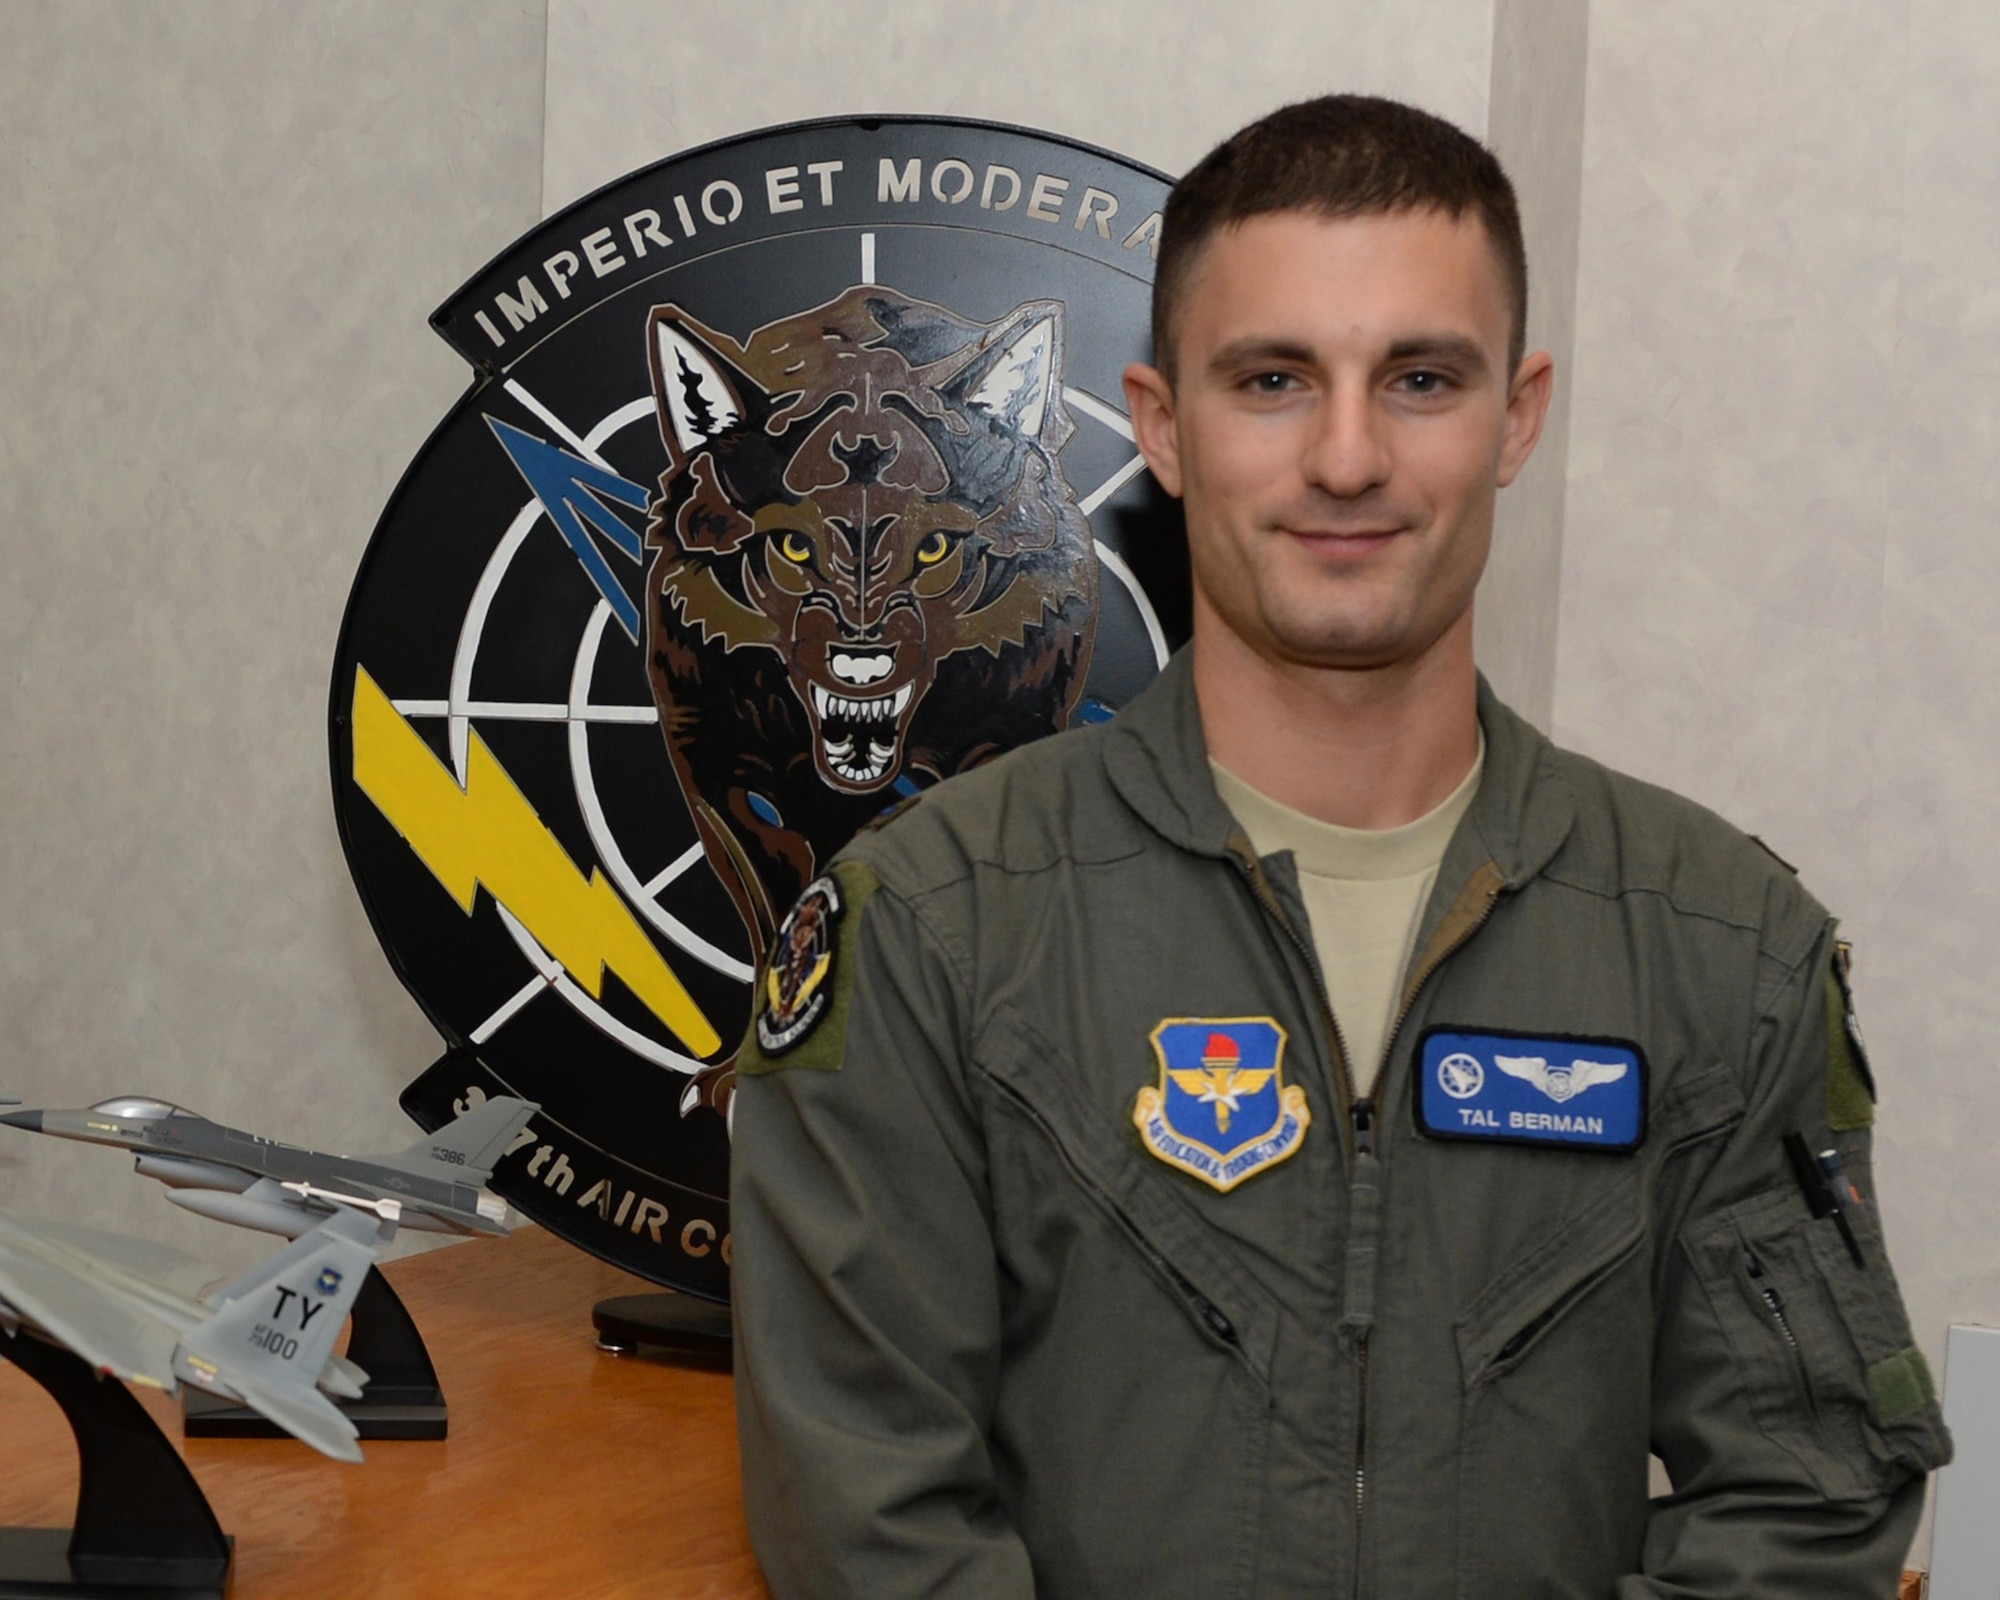 First Lieutenant Tal Berman, 337th Air Control Squadron instructor poses in front of the squadron emblem at Tyndall Air Force Base, Fla. July 13, 2016. Berman joined the Air Force after he discovered his passion for leadership and helping people grow both professionally and personally. (U.S. Air Force photo by Airman 1st Class Cody R. Miller/Released)